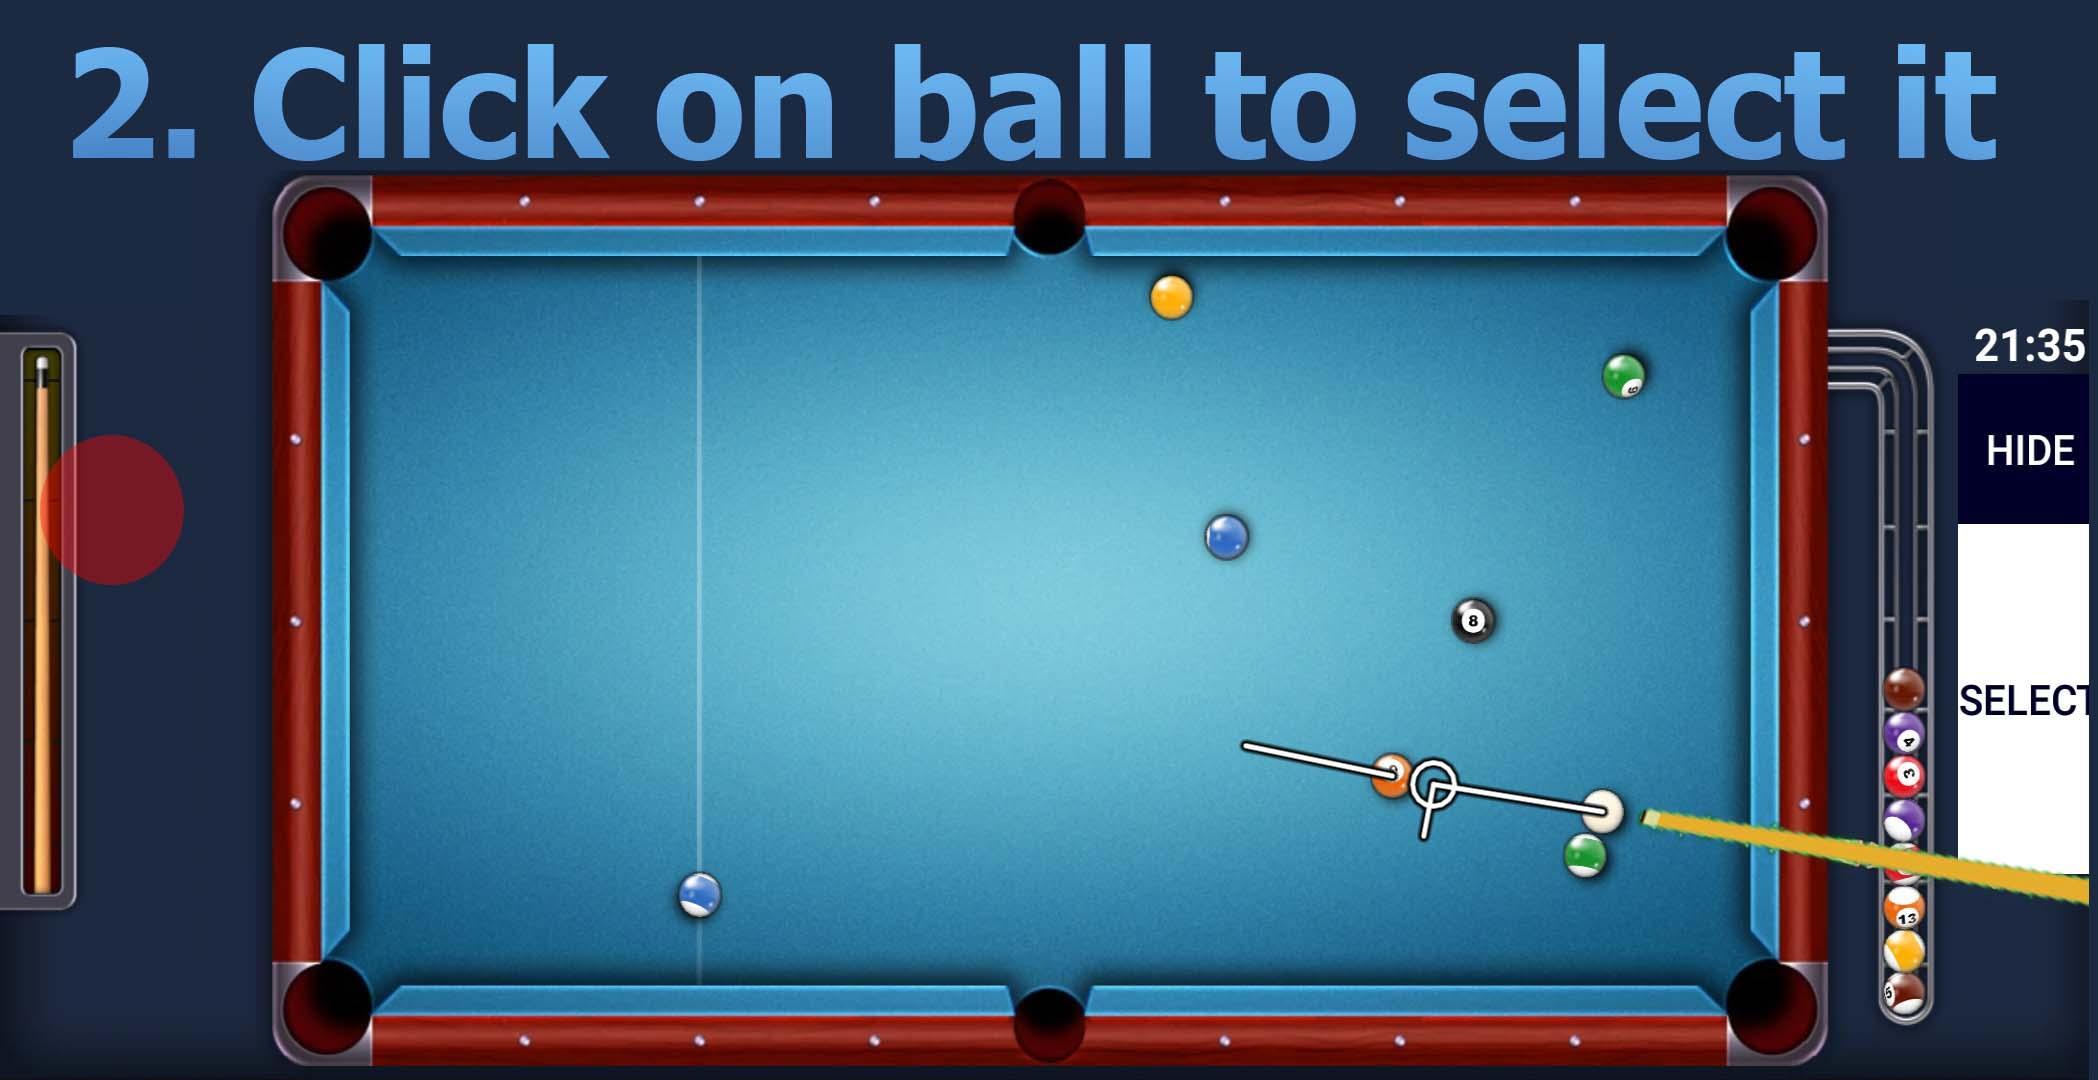 8 Ball Pool Trainer for Android - APK Download